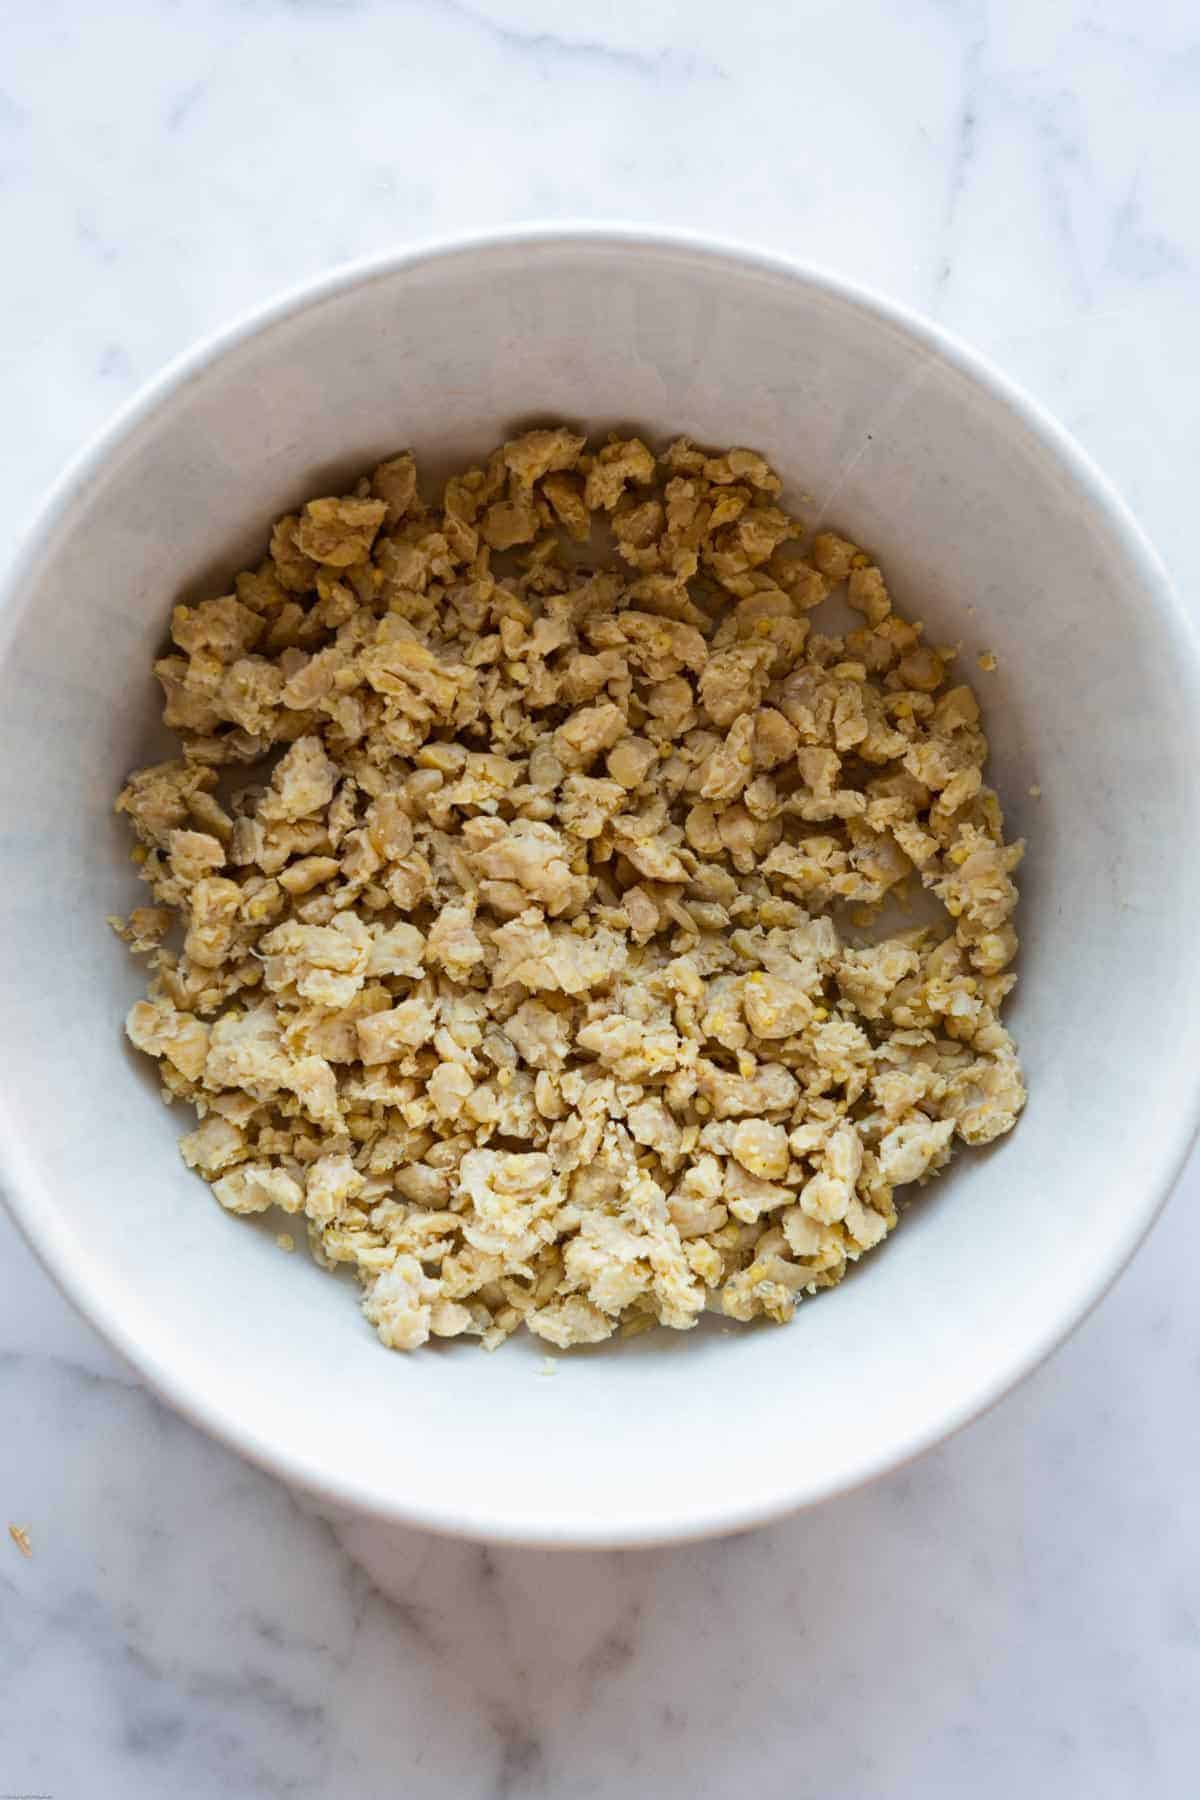 Crumbled tempeh in a glass bowl.